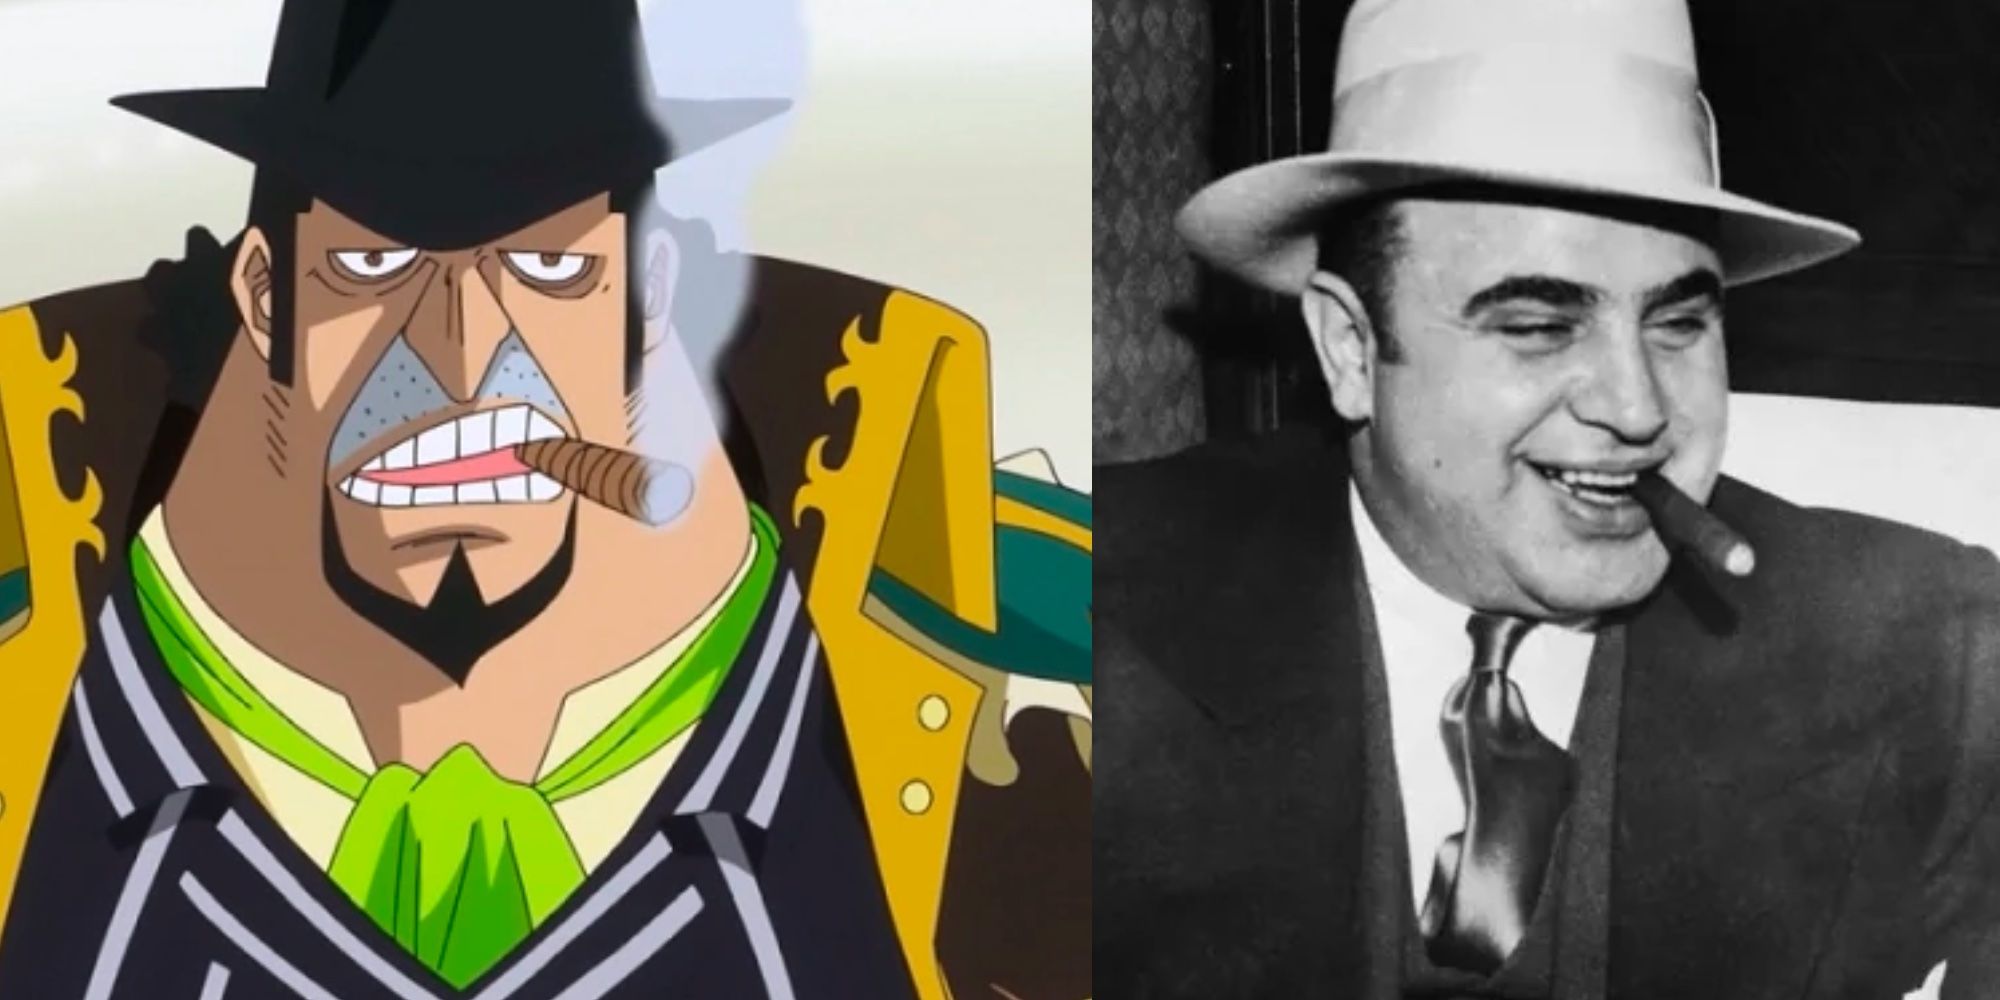 Collage of Capone Bege on the left, and the real Al Capone on the right, both wearing their iconic hat and smoking a cigarette